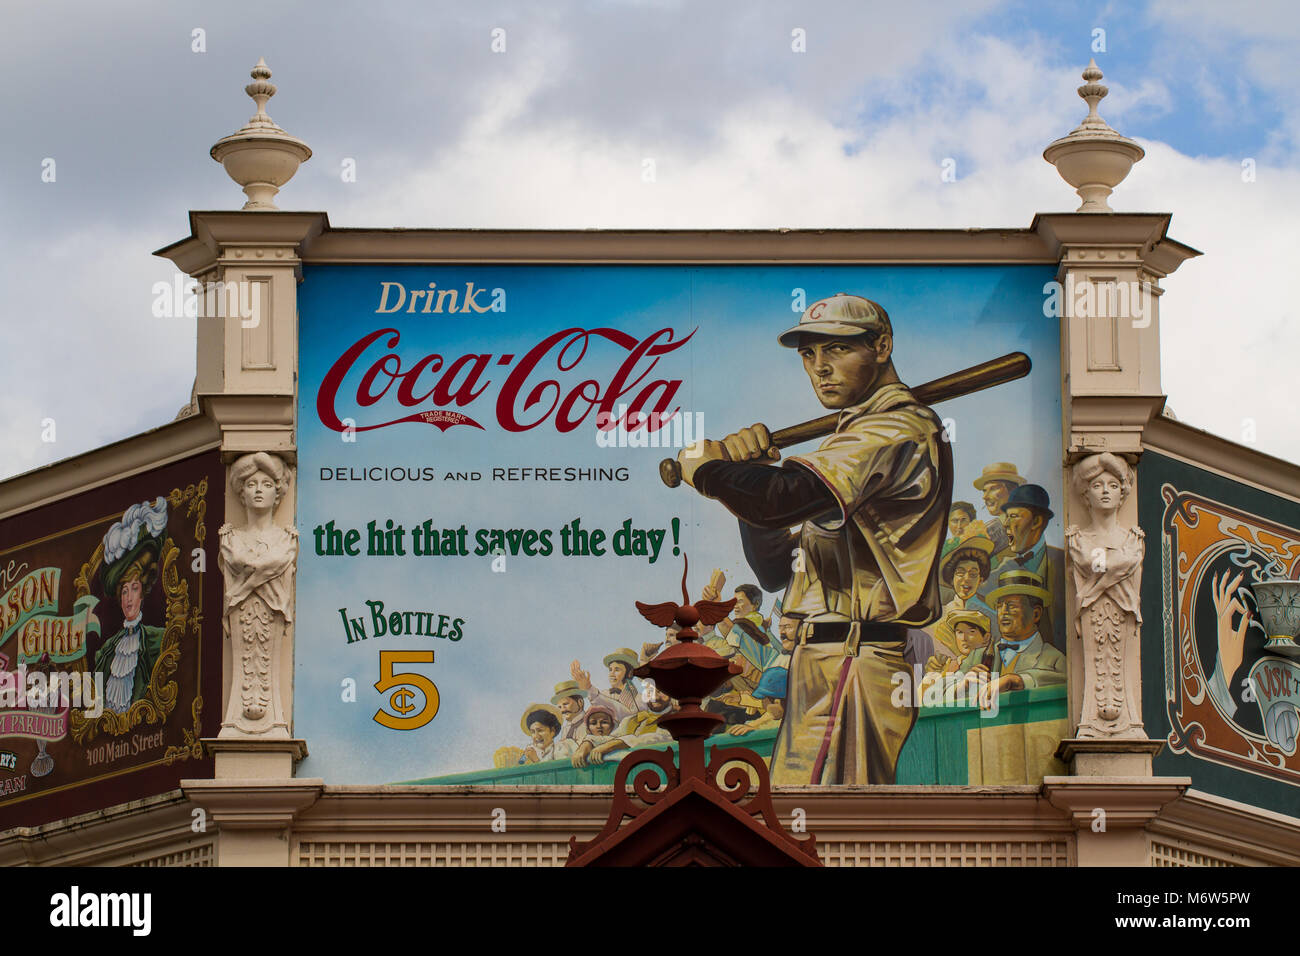 A large billboard with an old fashioned, vintage Coca Cola advertisement showing a baseball Star and Coke slogan. Stock Photo